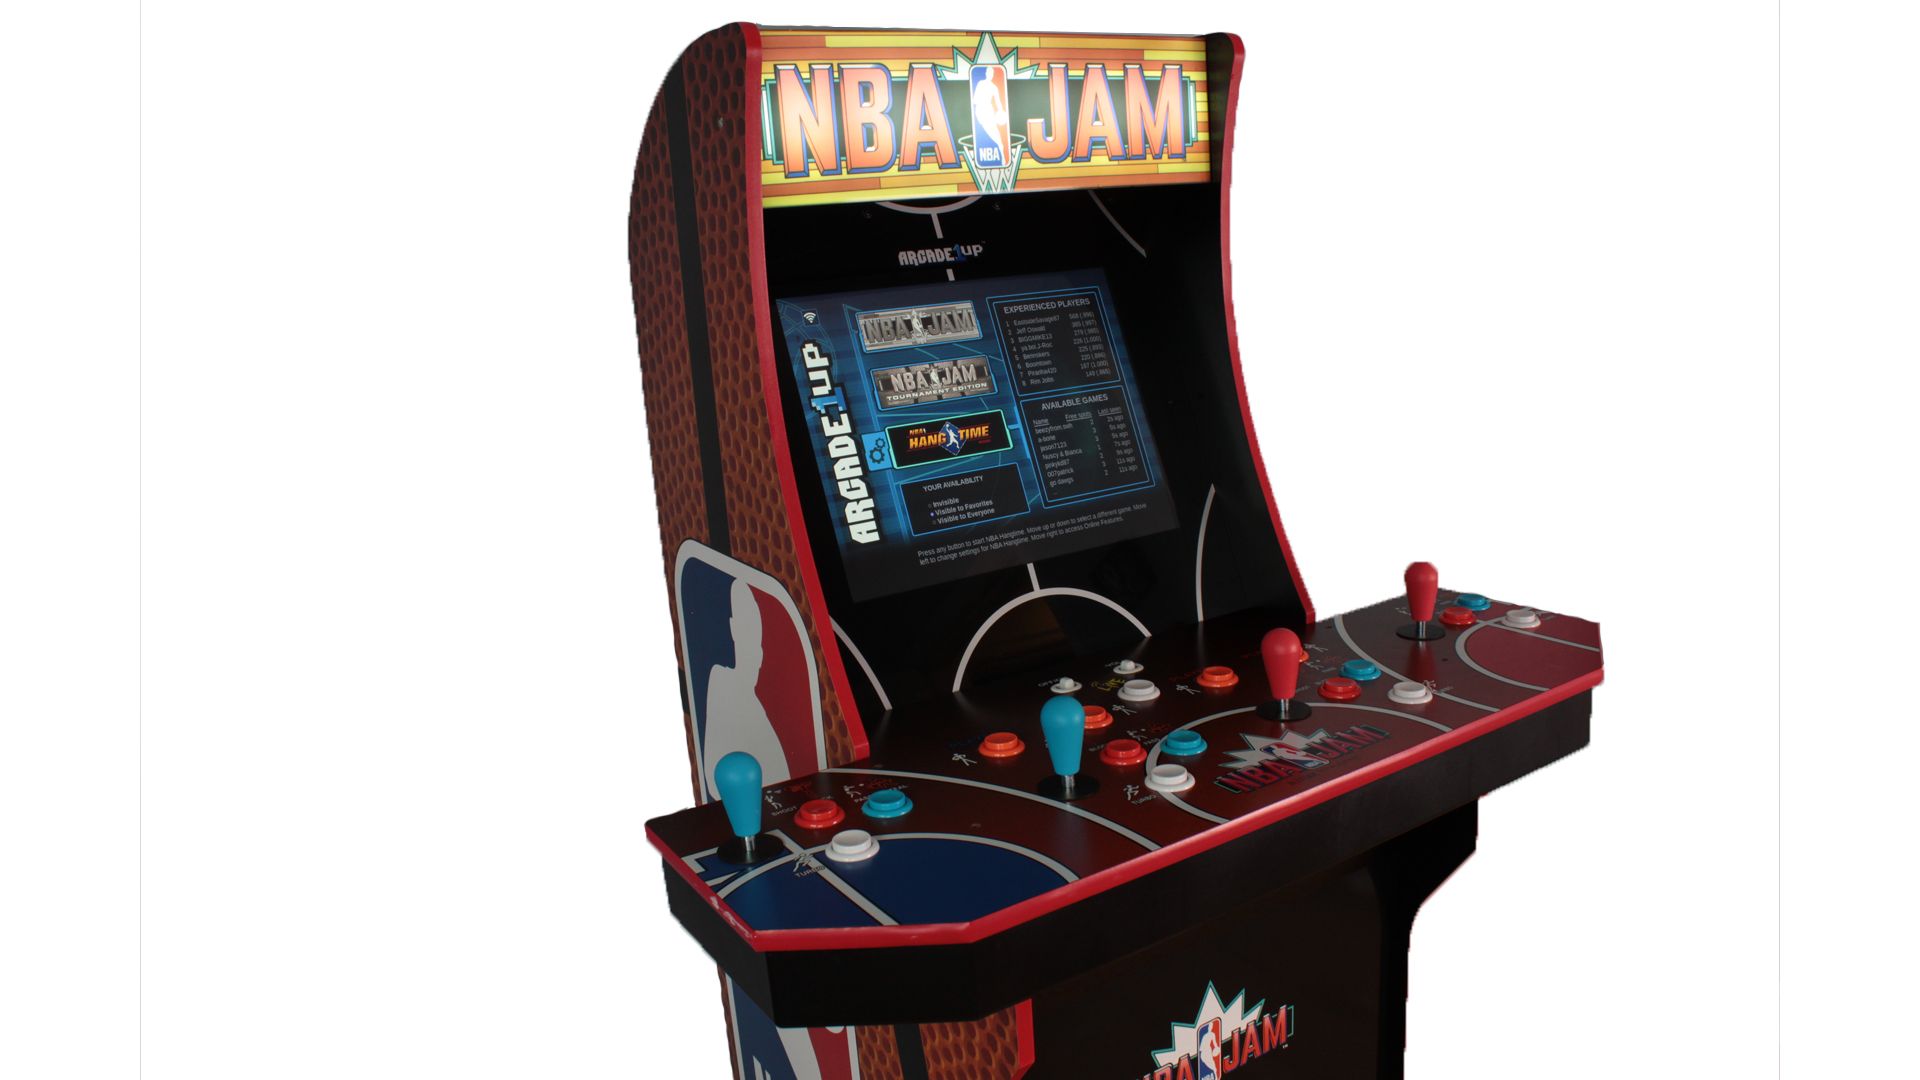 A closeup of the NBA Jam machine's marquee, lit up.